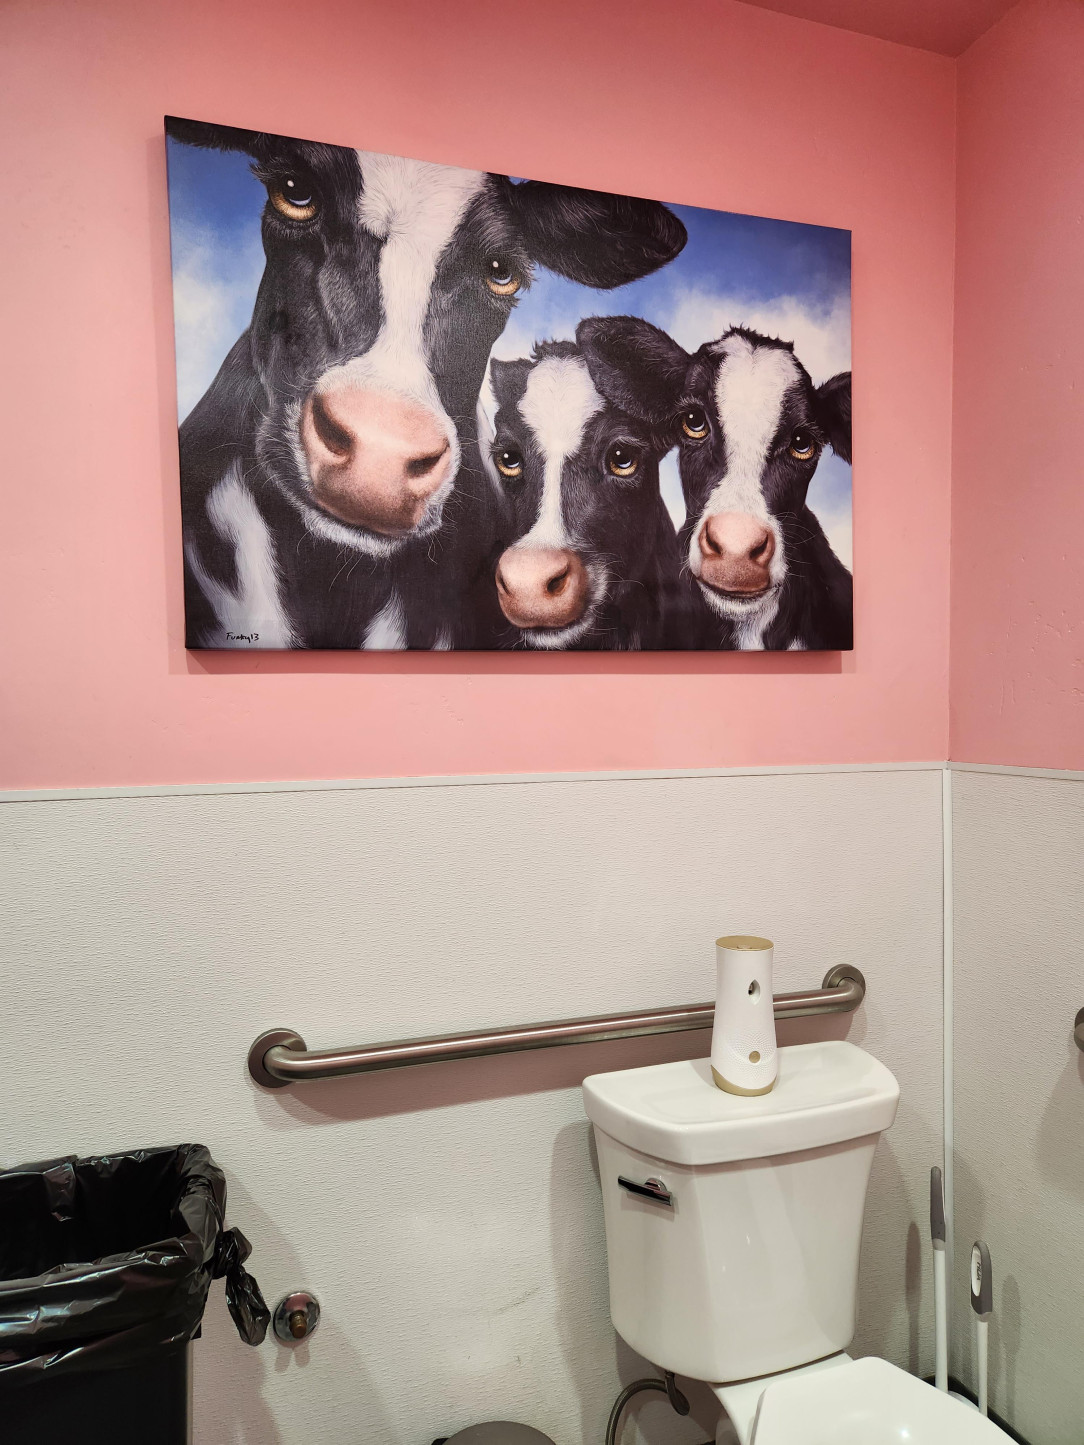 A cow painting in the bathroom of an ice cream shop